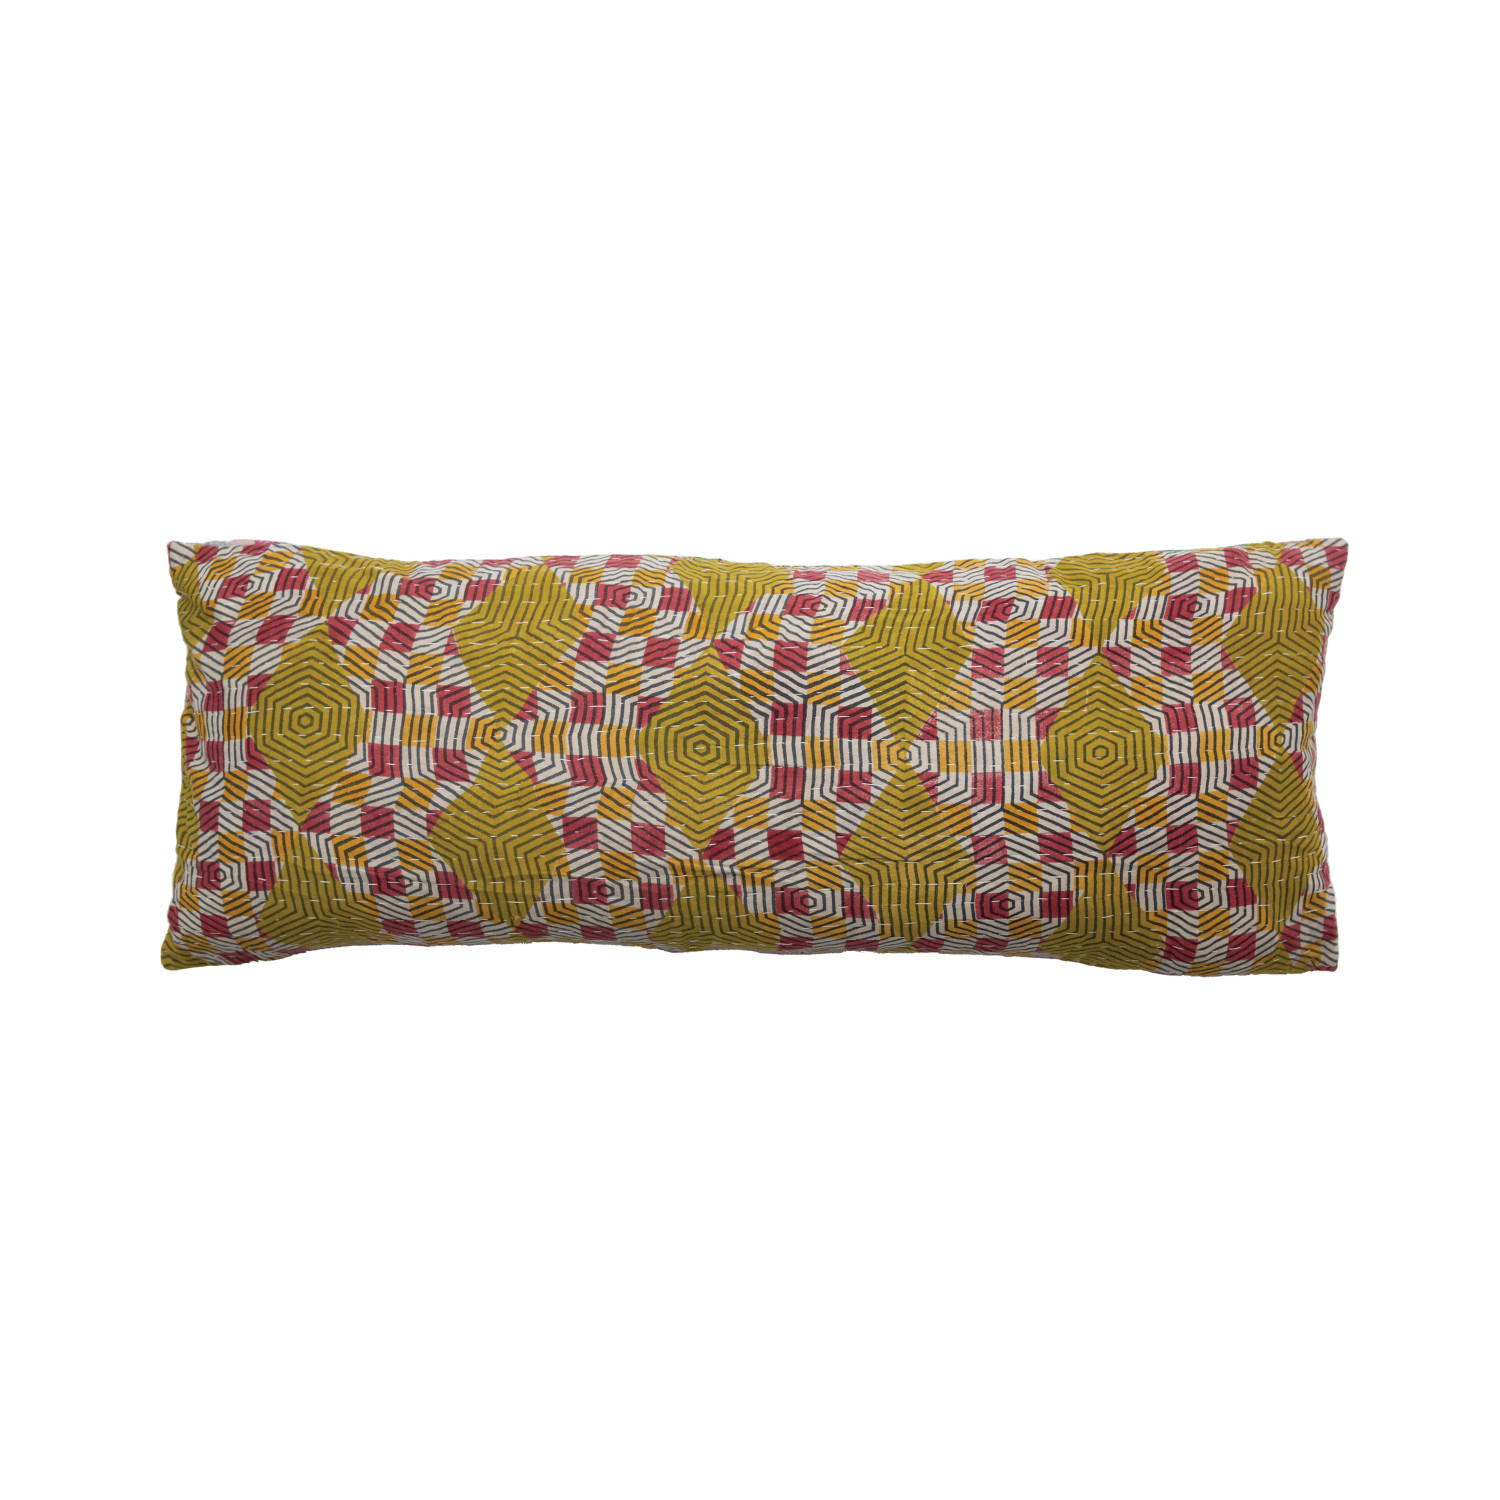 Extra large decorative throw pillows handmade kantha pillows for couch -  PS12